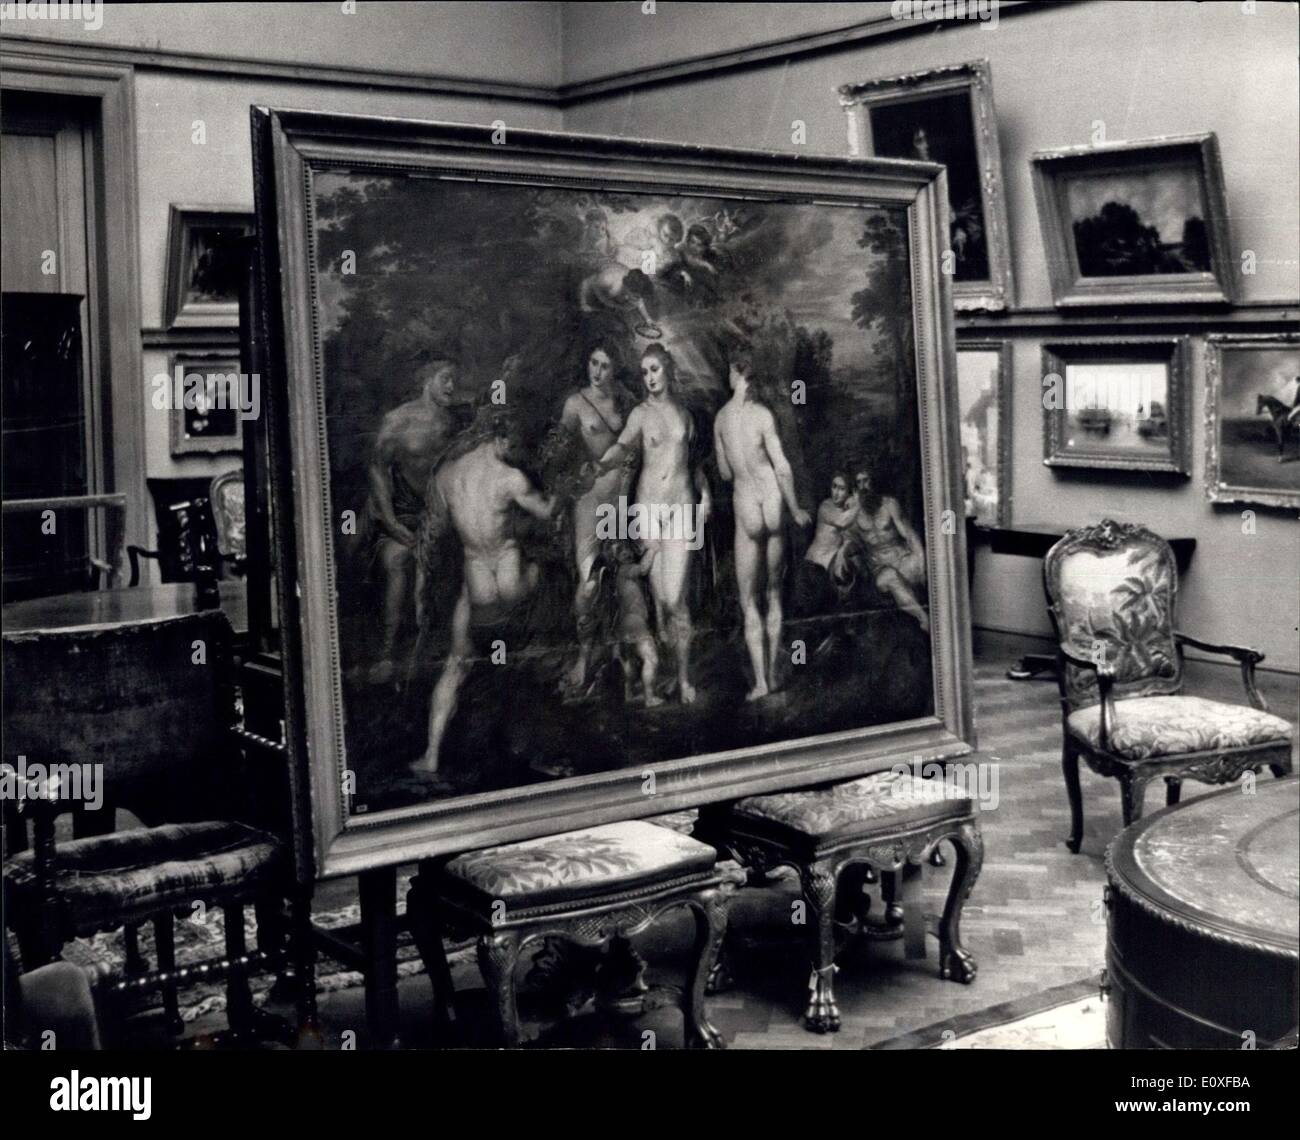 Sep. 05, 1966 - A Rubens masterpiece discovered in Lot due for auction at Christie's: A Rubens masterpiece The Judgement of Paris has been discovered in a consignment of works sent to Christie's of London for auction. The painting is owned by 82 year old Mrs. Savage has had it hanging unnoticed at her home in Colwyn Road, Northampton. Thirty years ago it was worth a few shillings. A junk dealer at York had bought it to burn in the hope of recovering a few ounces of gold leaf from its frame. Mrs. Savage's husband, a picture framer, liked the look of it, and it passed to old paintings. Mr Stock Photo